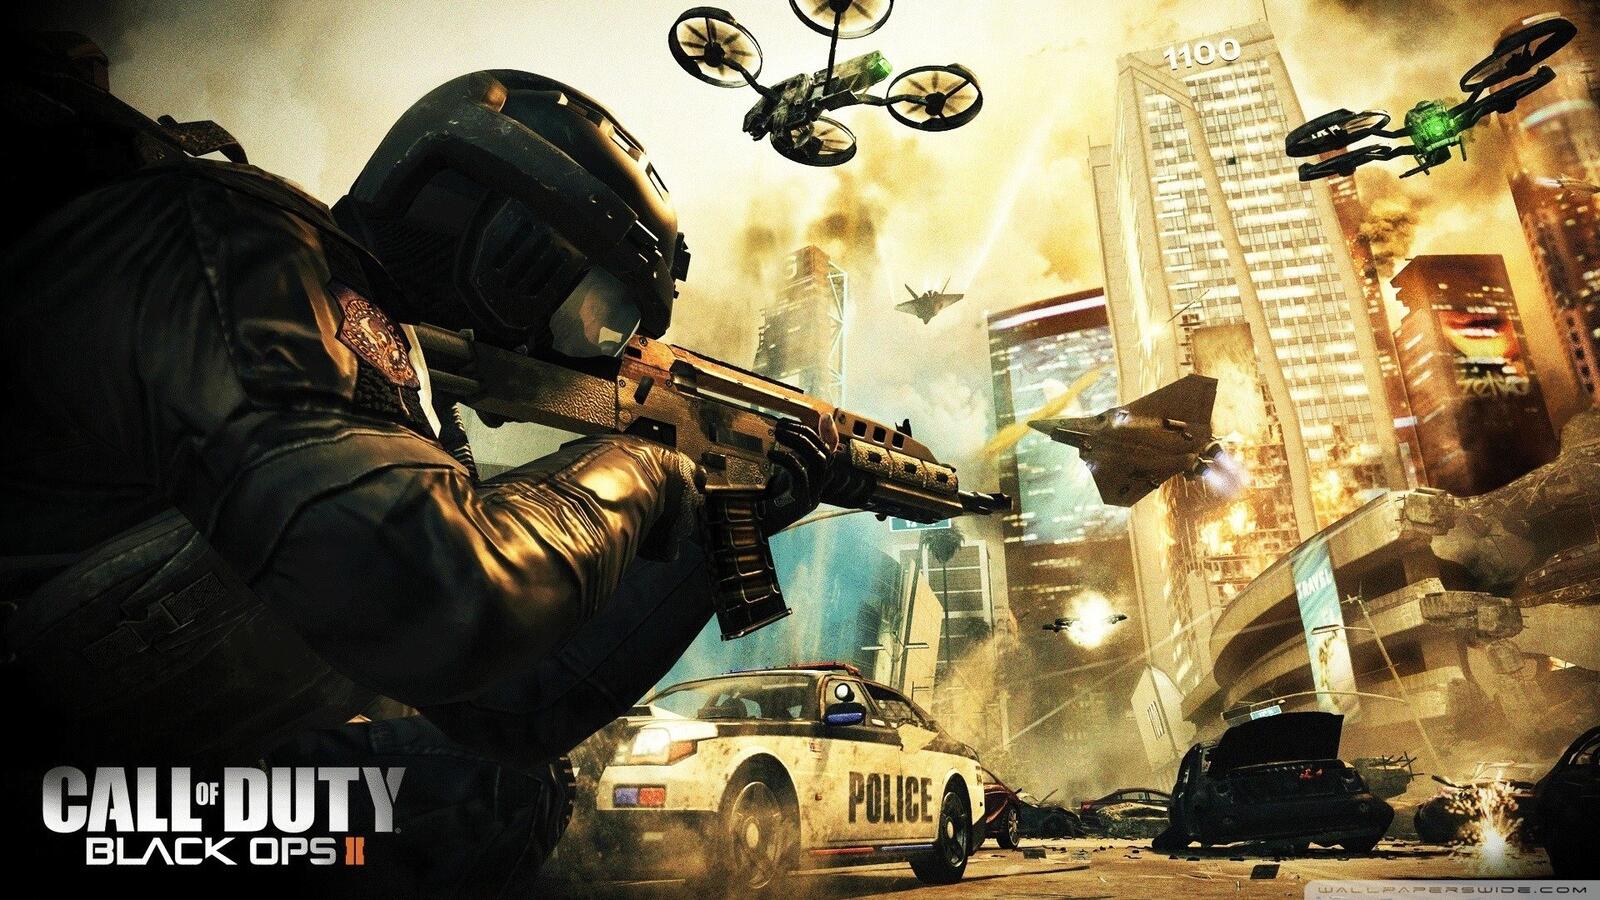 Free photo Picture from the game Call of Duty Black Ops II